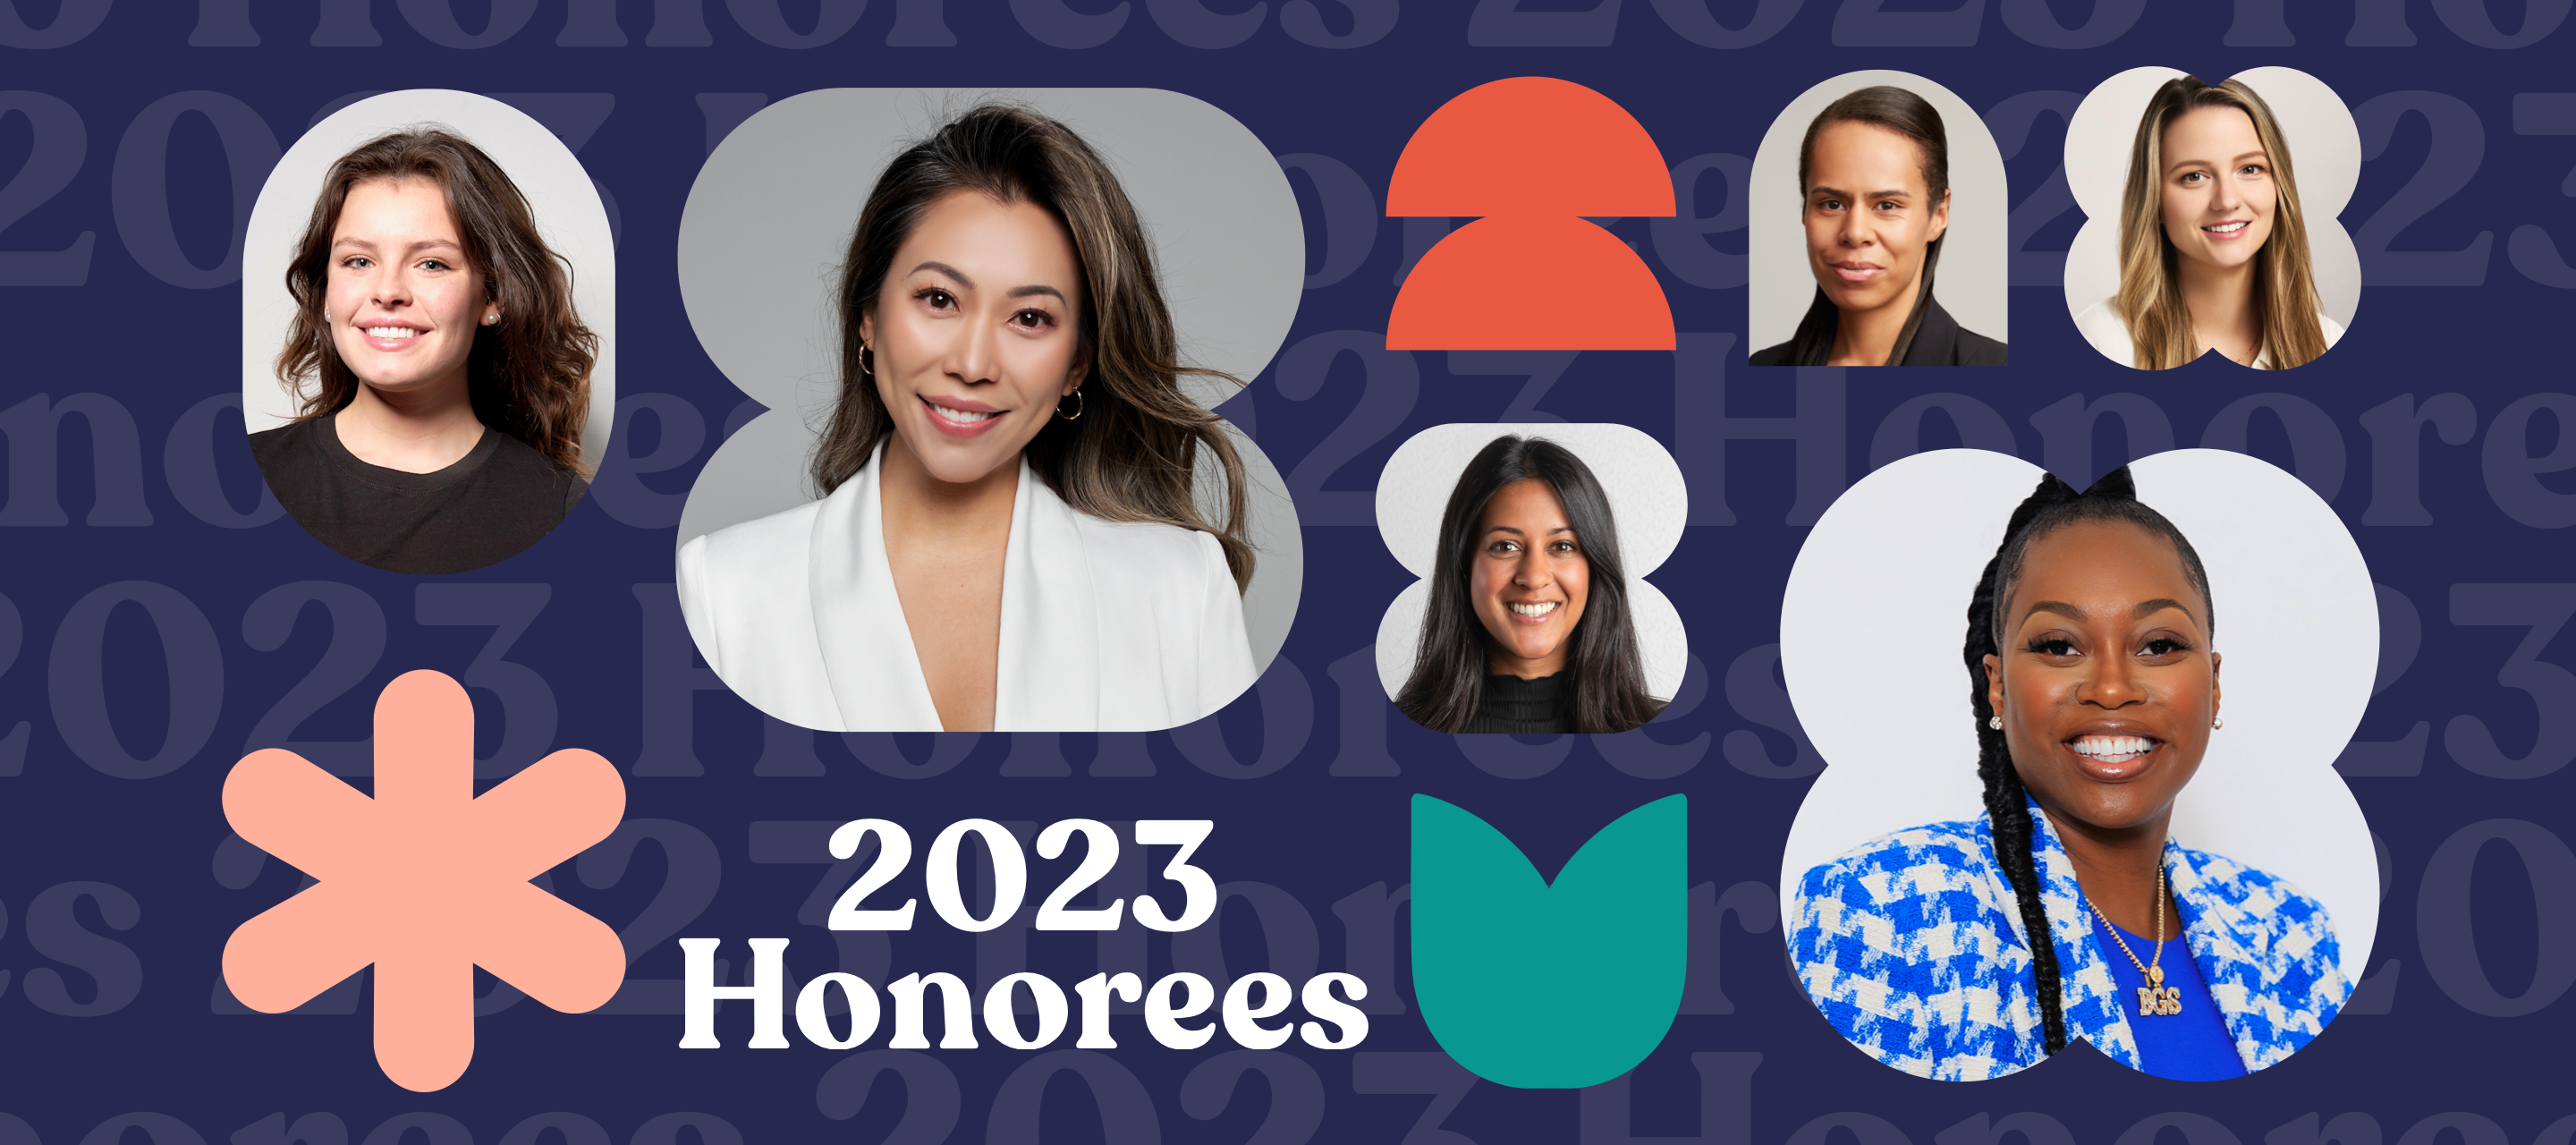 Introducing the 2023 Amazing Women in eCommerce Honorees